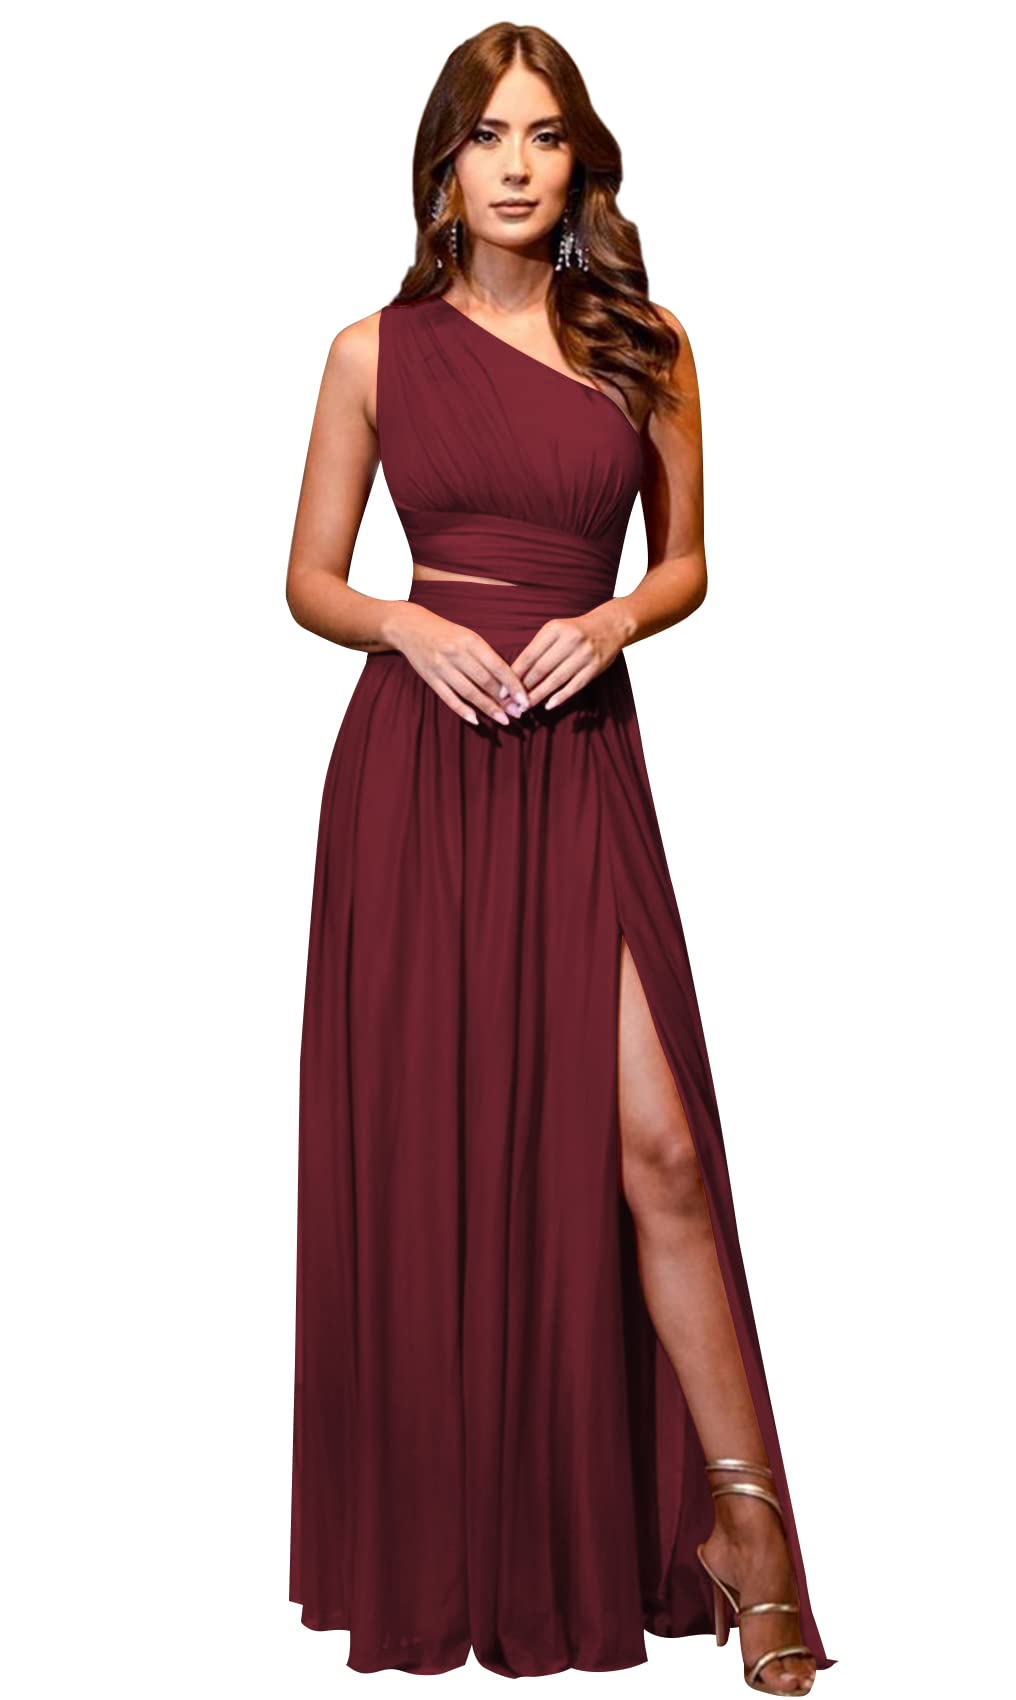 FEOLATE Women's One Shoulder Bridesmaid Dresses with Slit Long Chiffon Cutout Pleated Formal Dress with Pockets